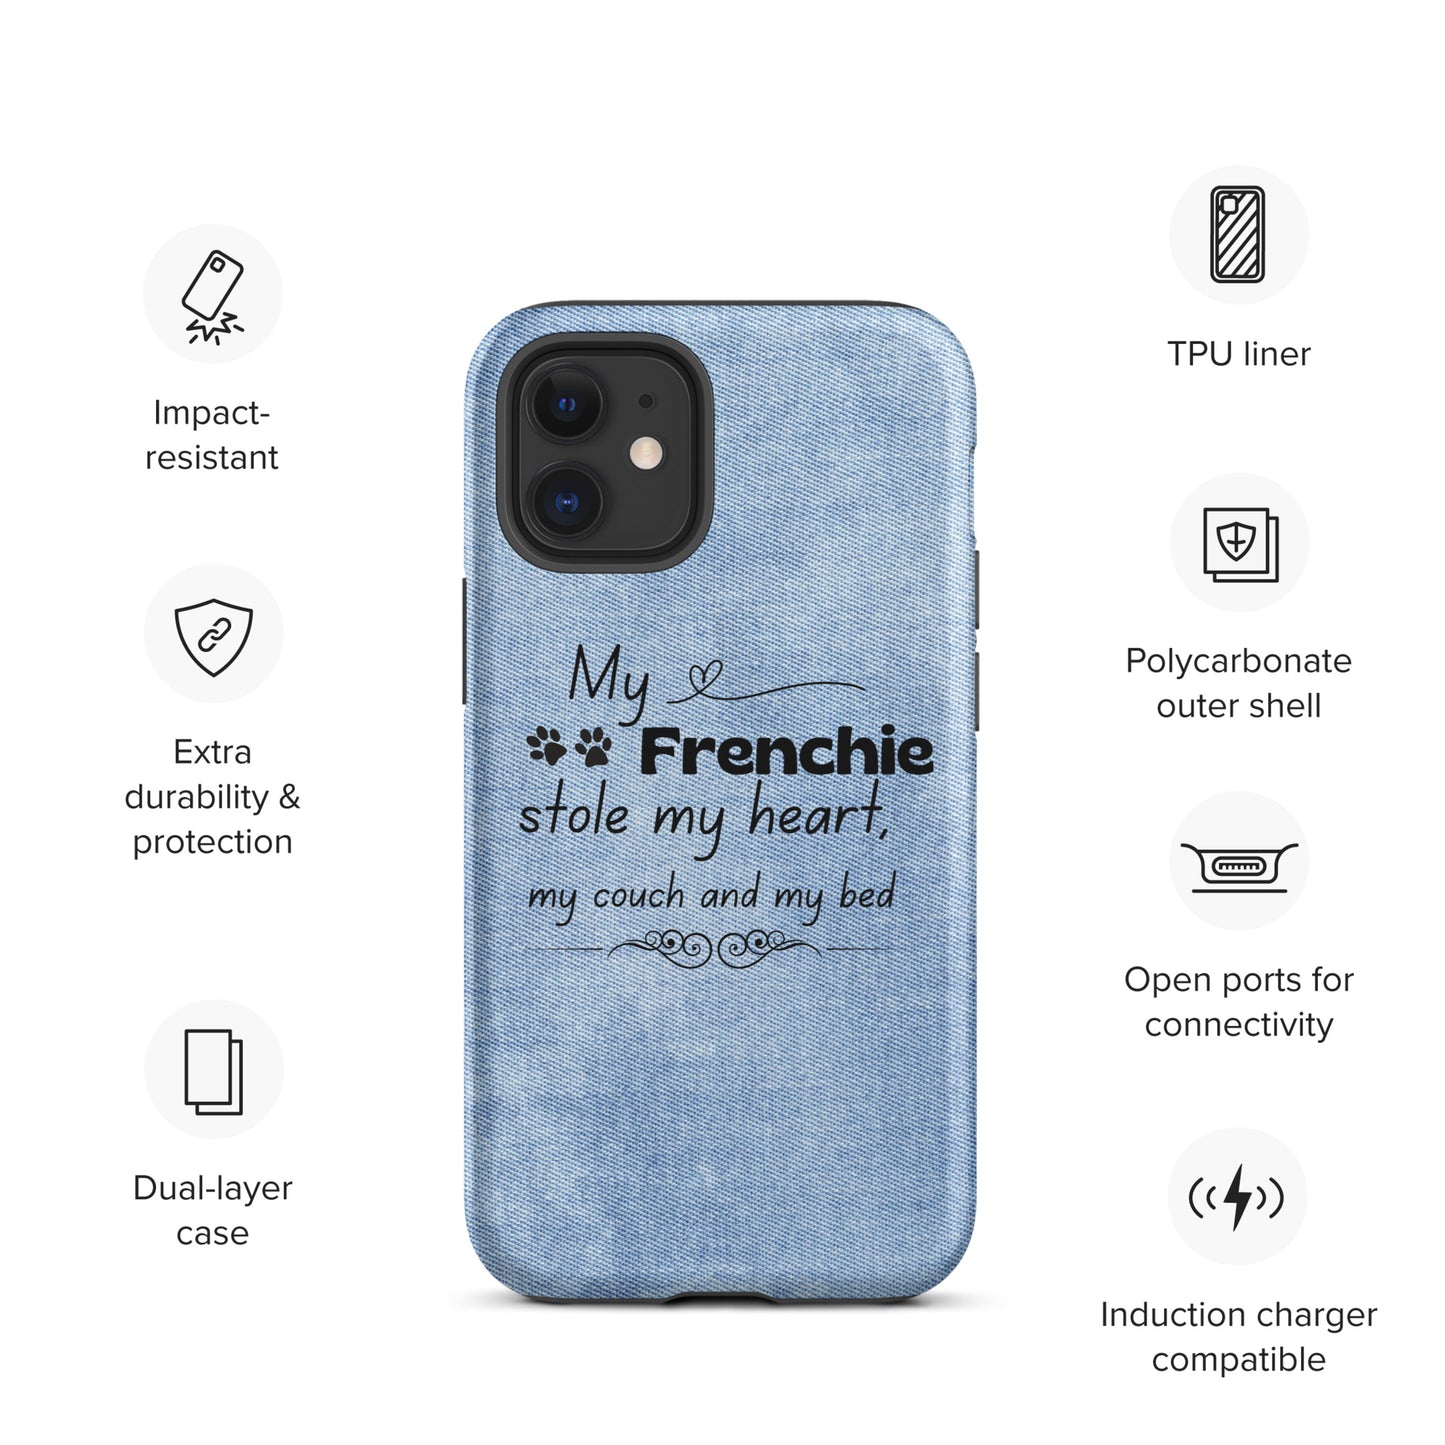 iPhone case 'My Frenchie stole my heart'